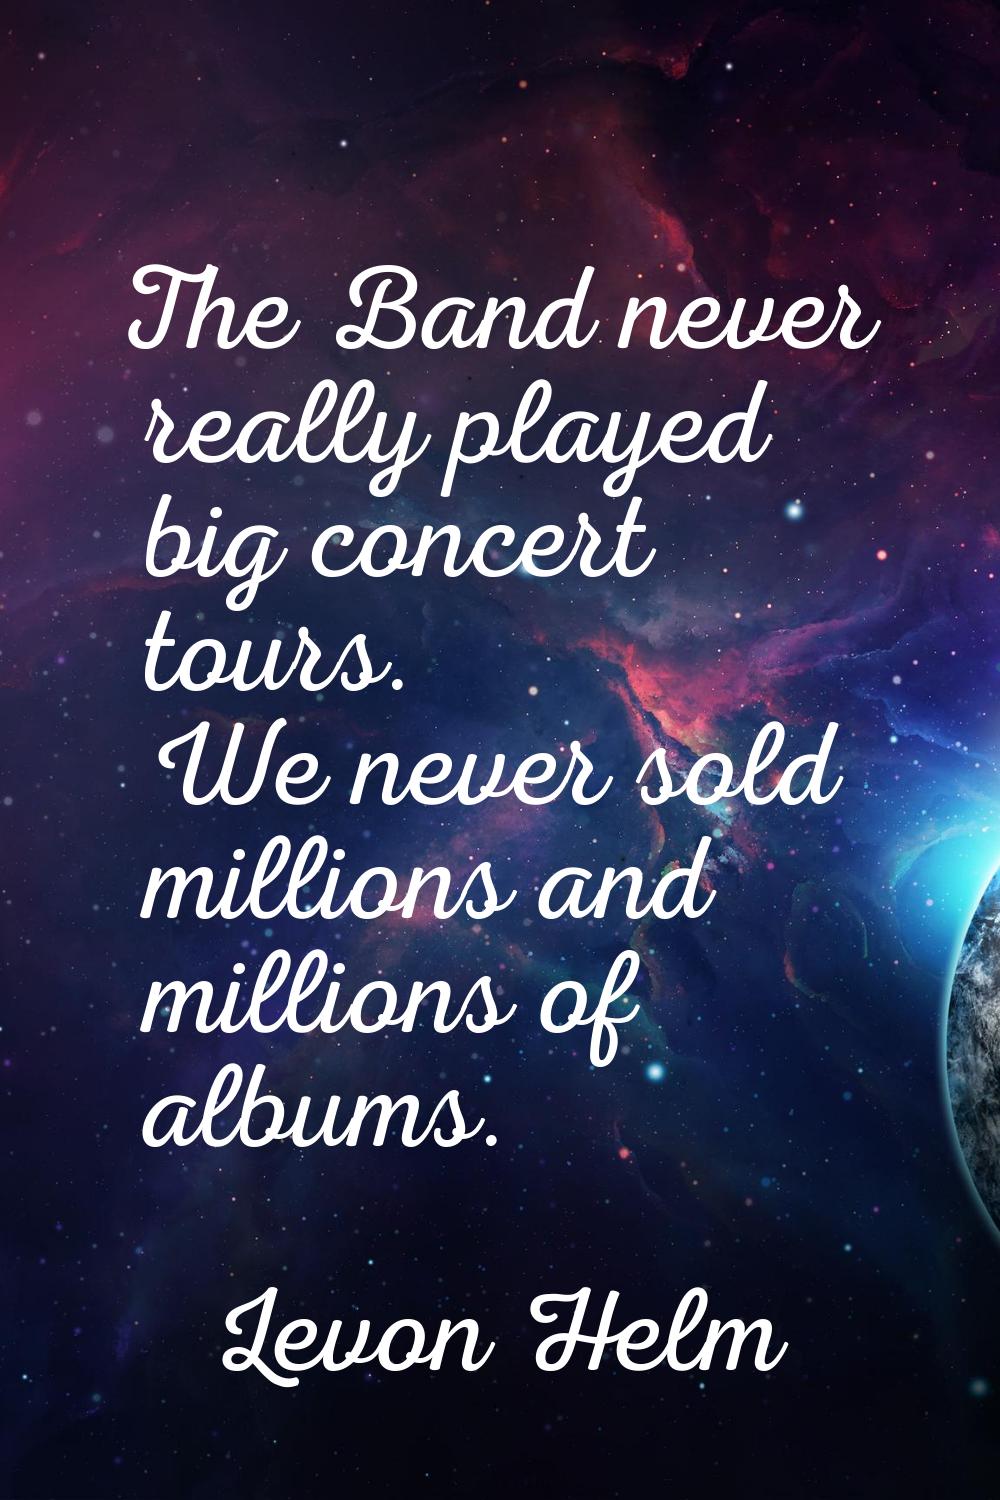 The Band never really played big concert tours. We never sold millions and millions of albums.